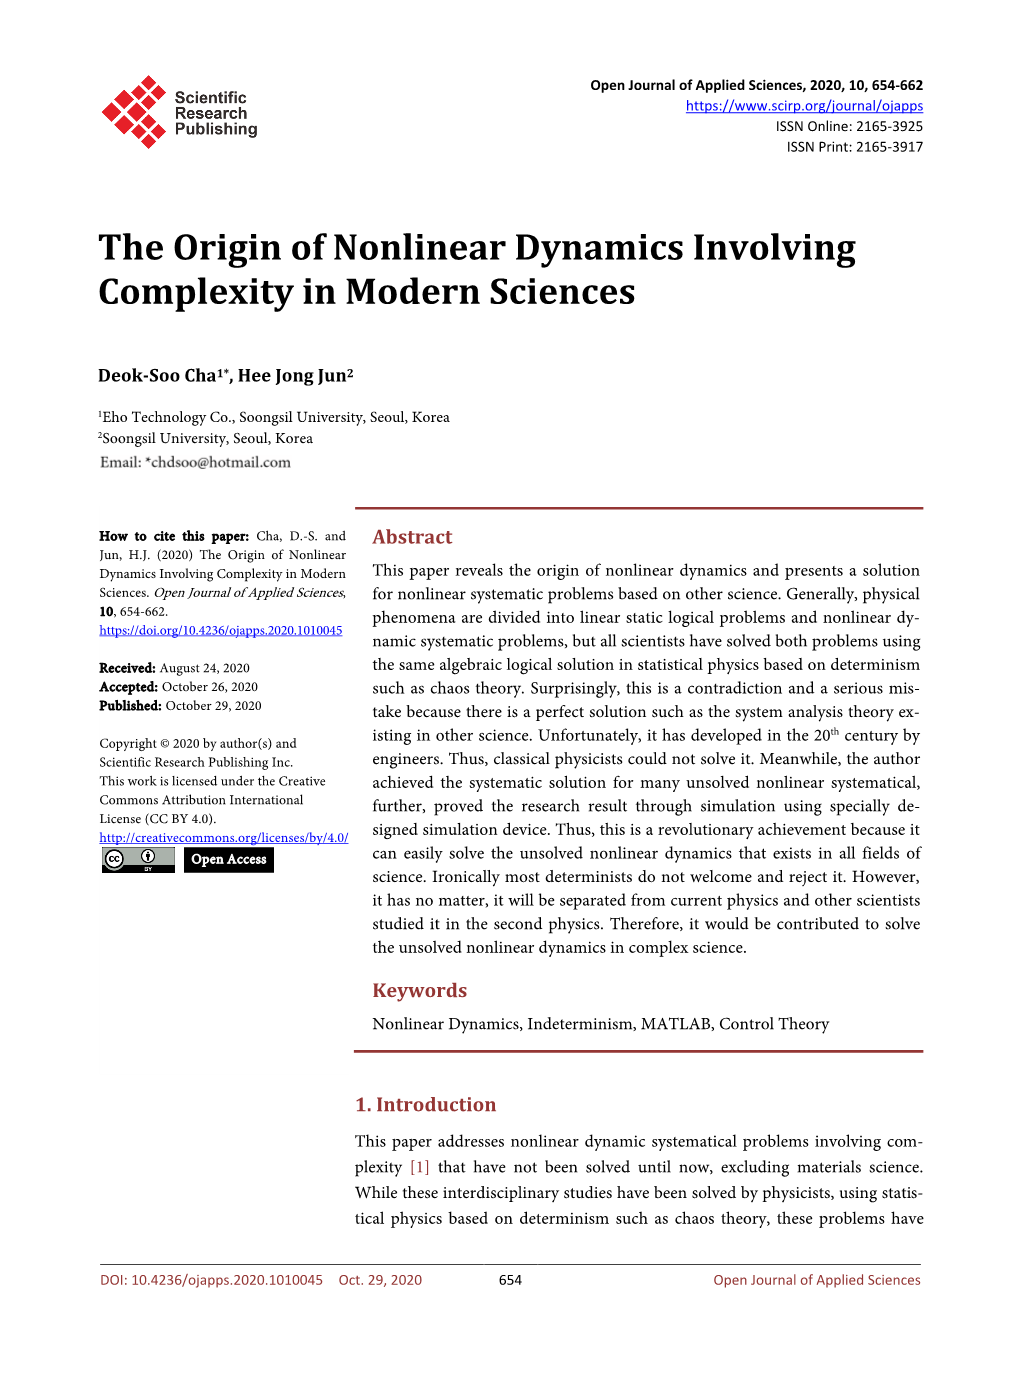 The Origin of Nonlinear Dynamics Involving Complexity in Modern Sciences